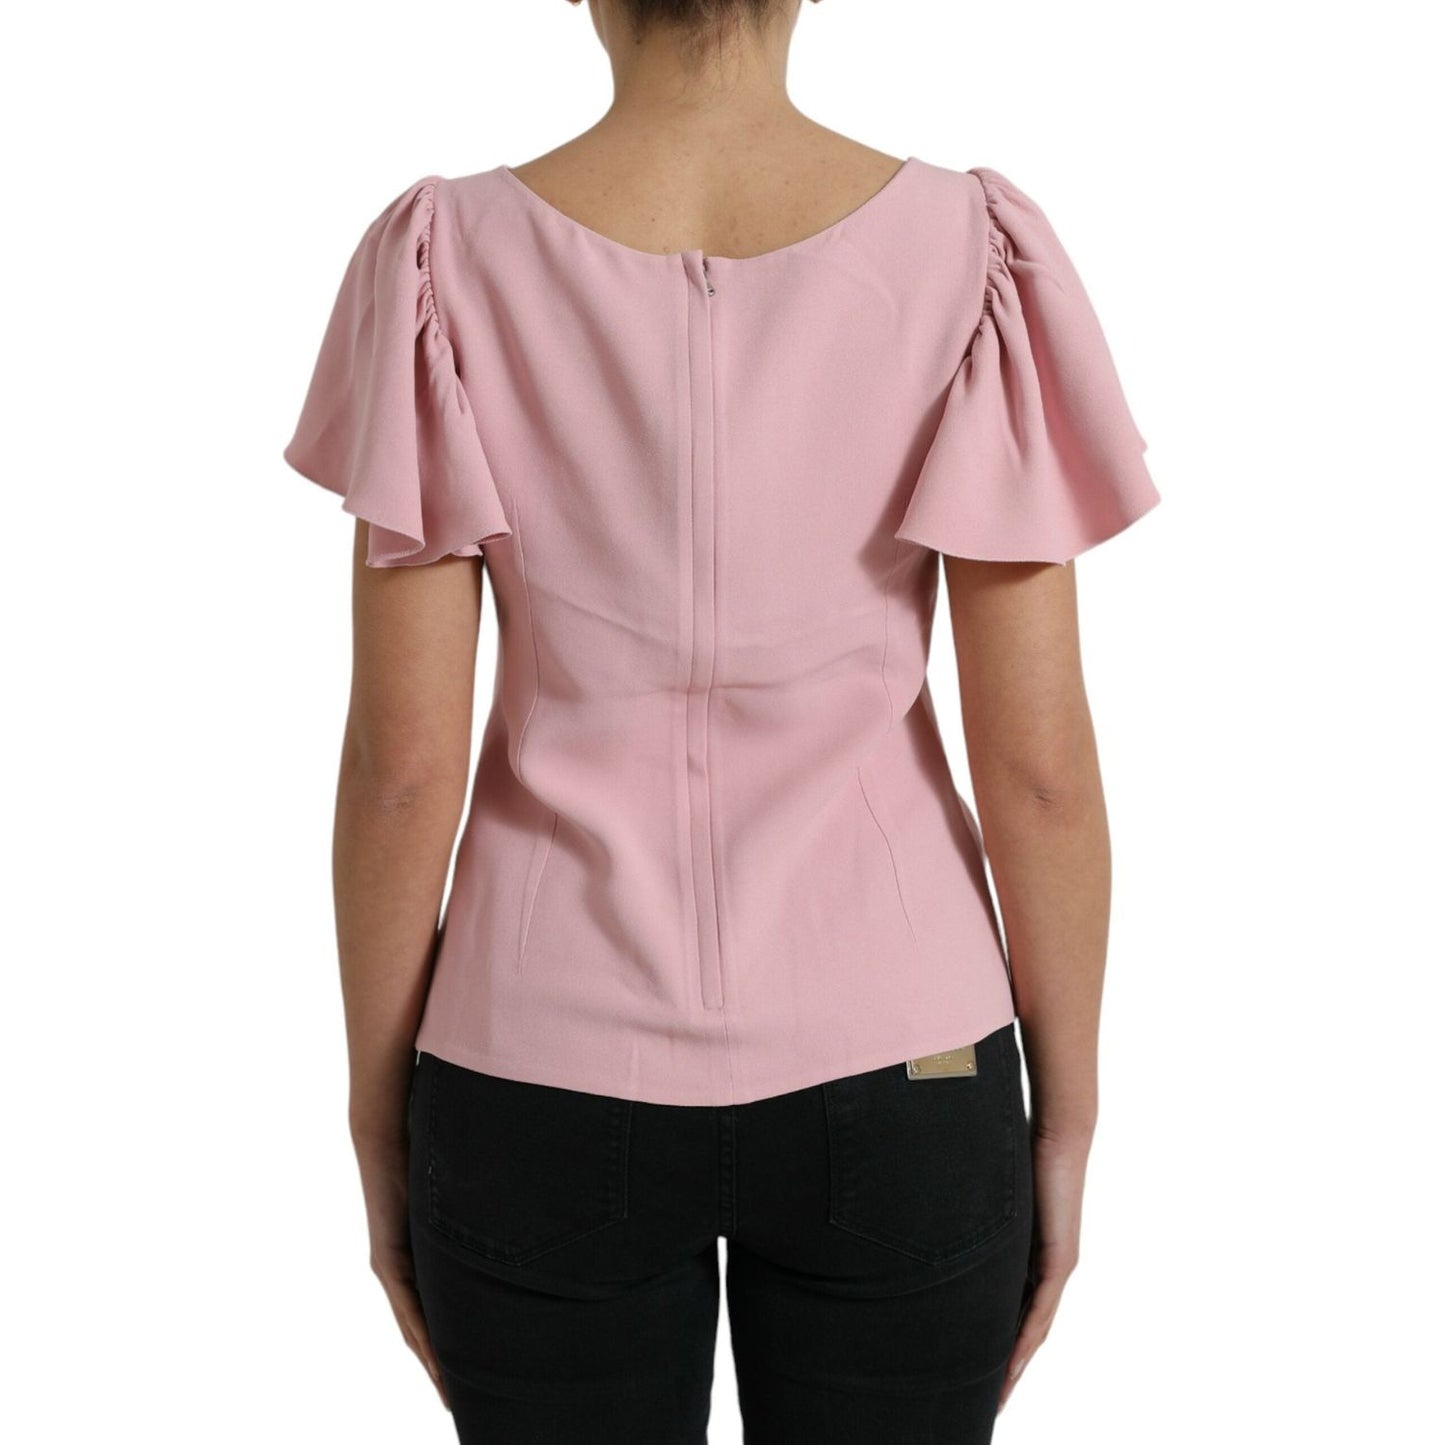 Dolce & Gabbana Chic Pink Bell Sleeve Top pink-short-sleeves-round-neck-blouse-top